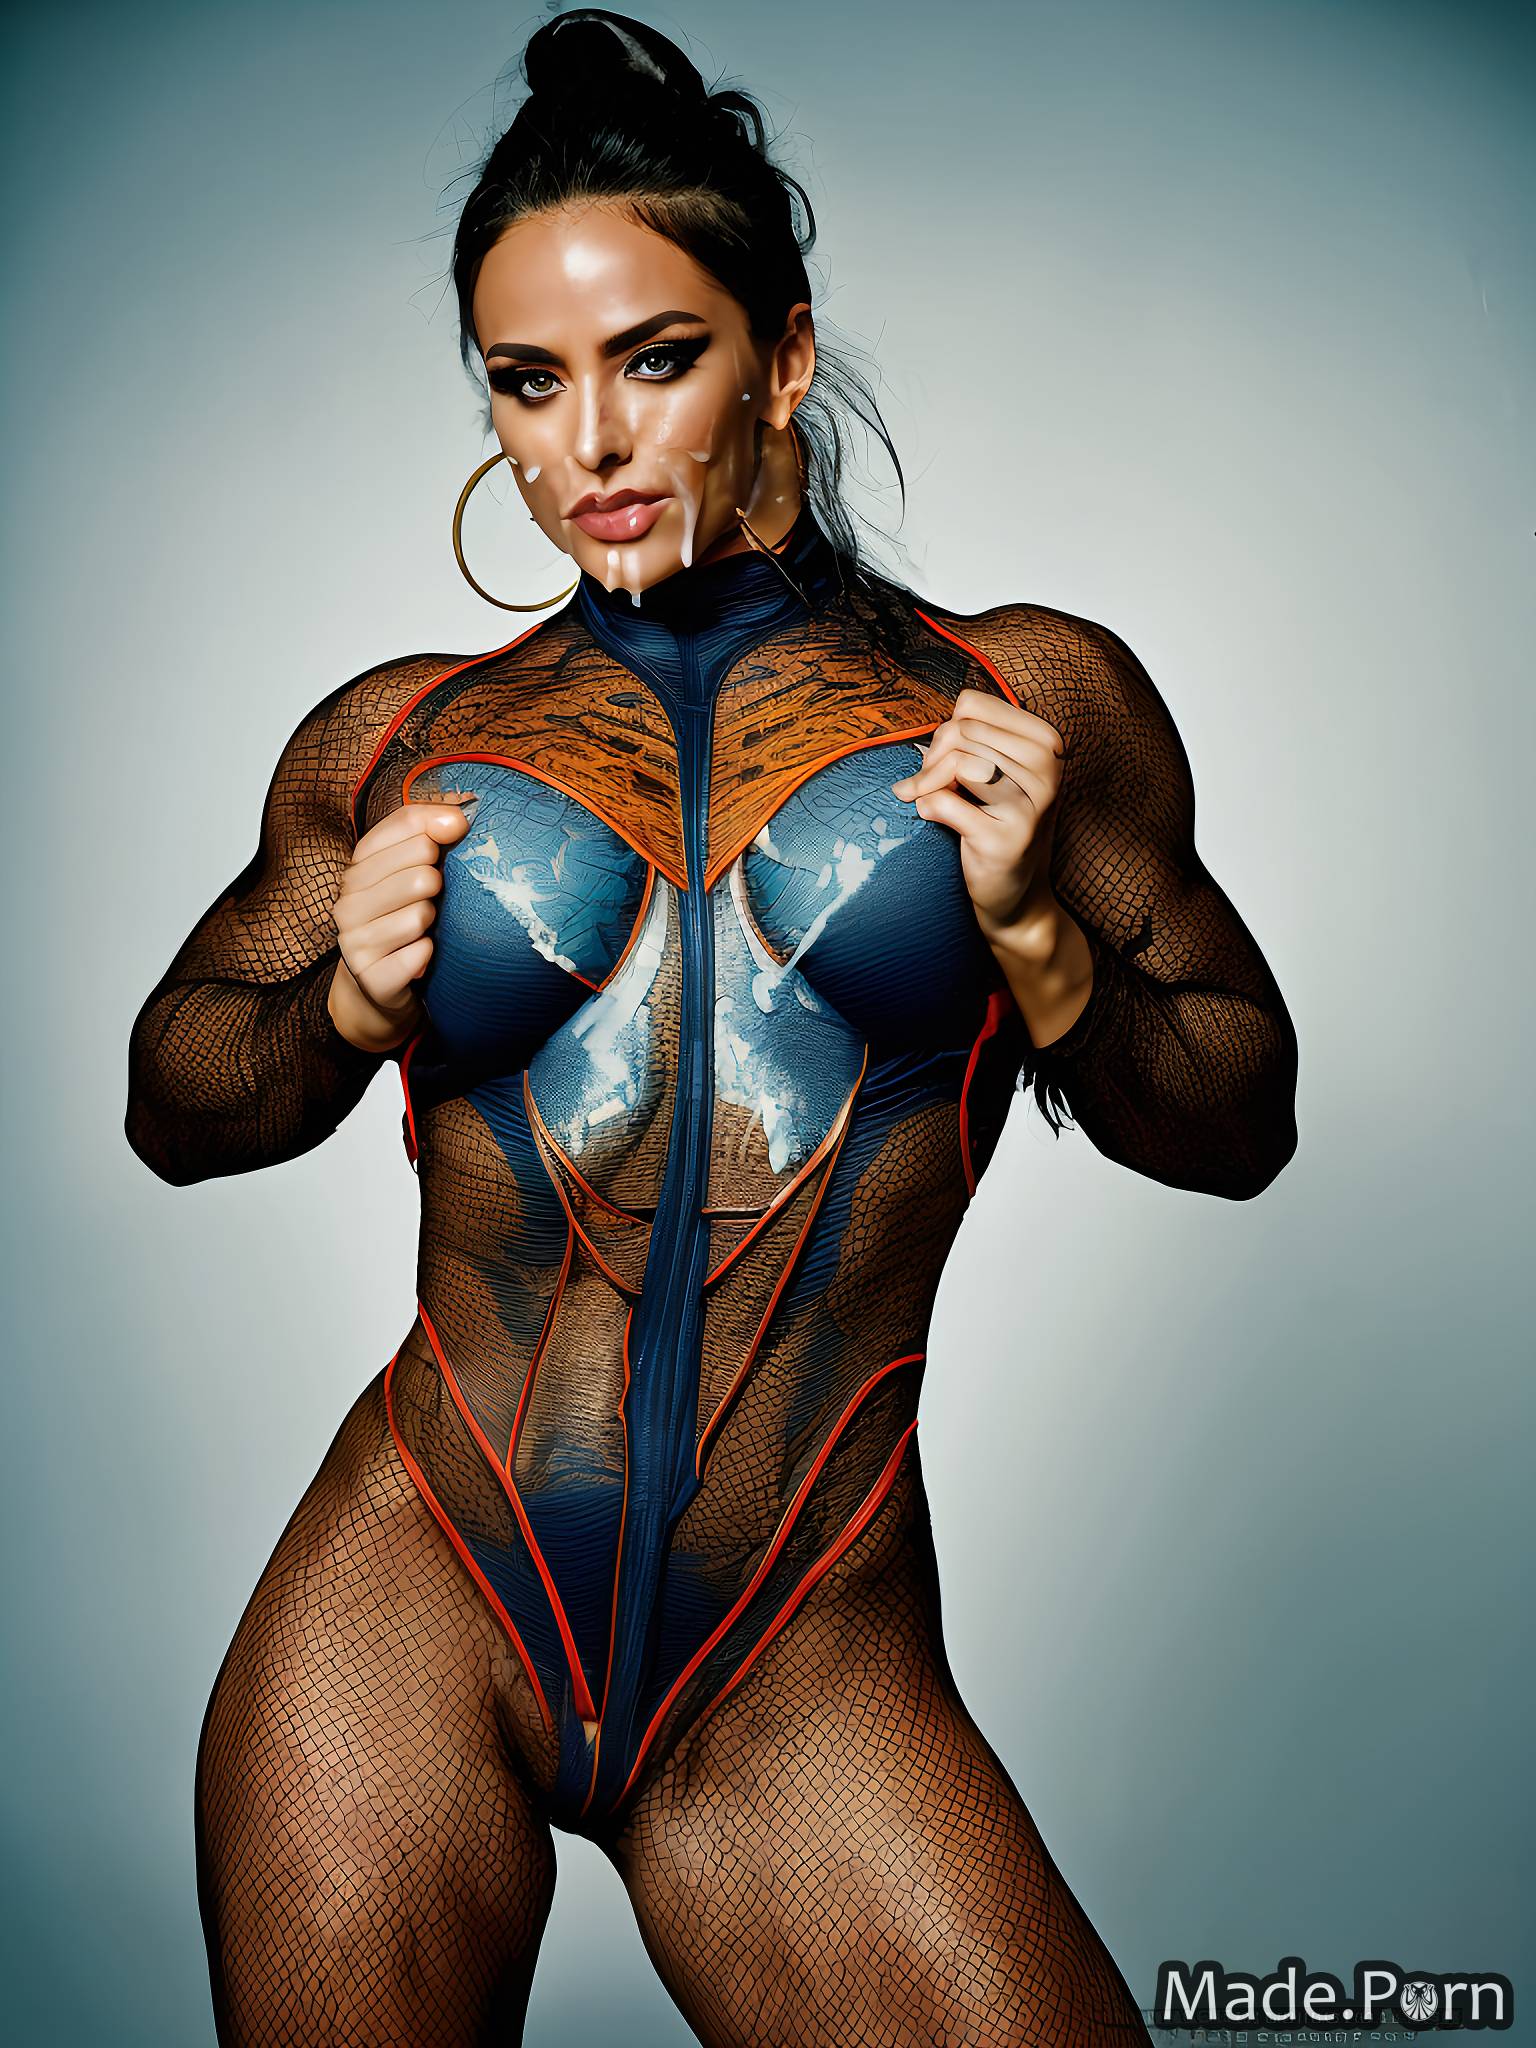 1536px x 2048px - Porn image of superhero bodybuilder 20 muscular bodysuit made tight created  by AI